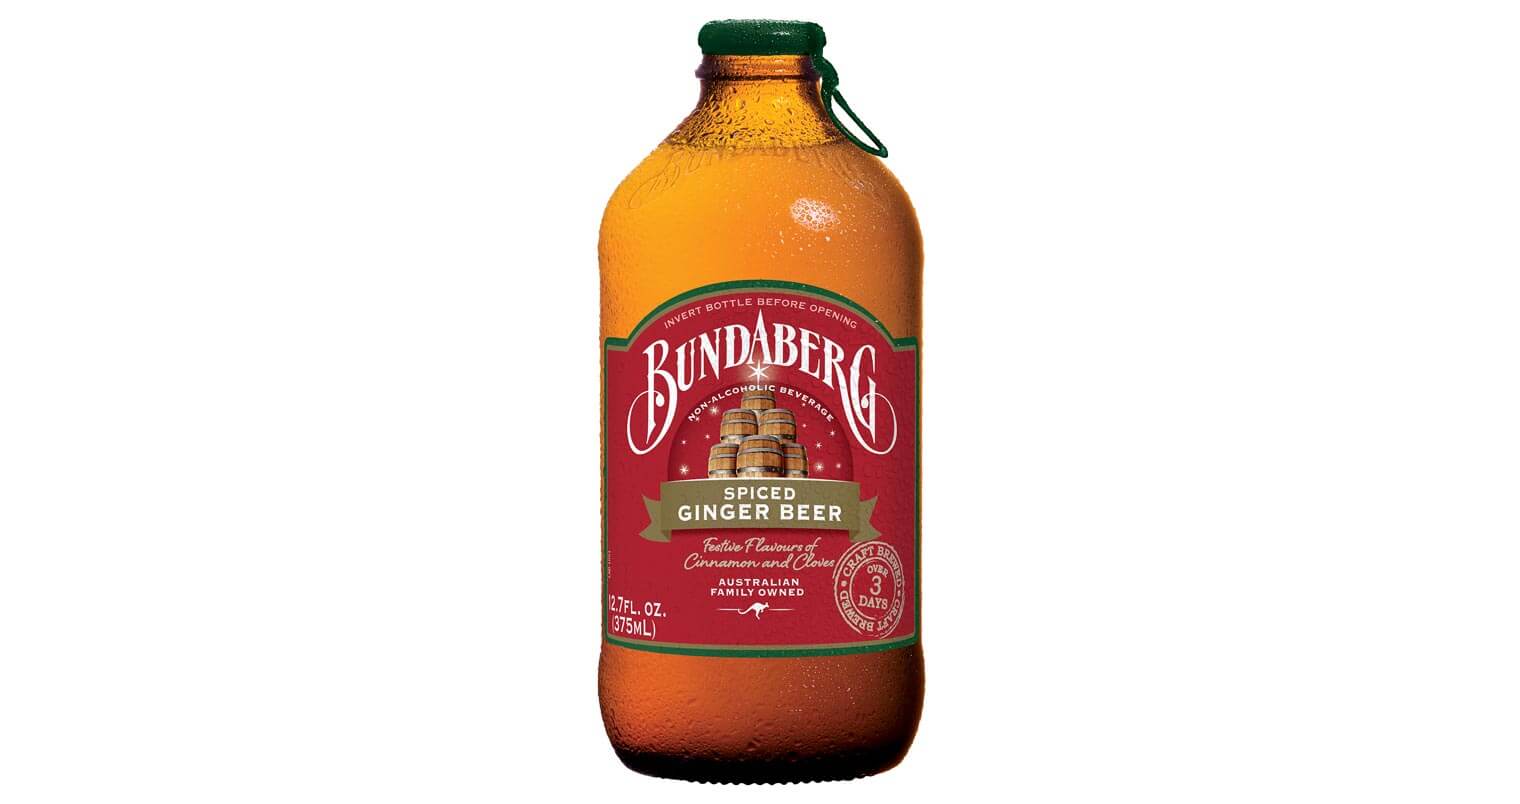 Bundaberg Launches Limited Release Spiced Ginger Beer in the U.S., featured image